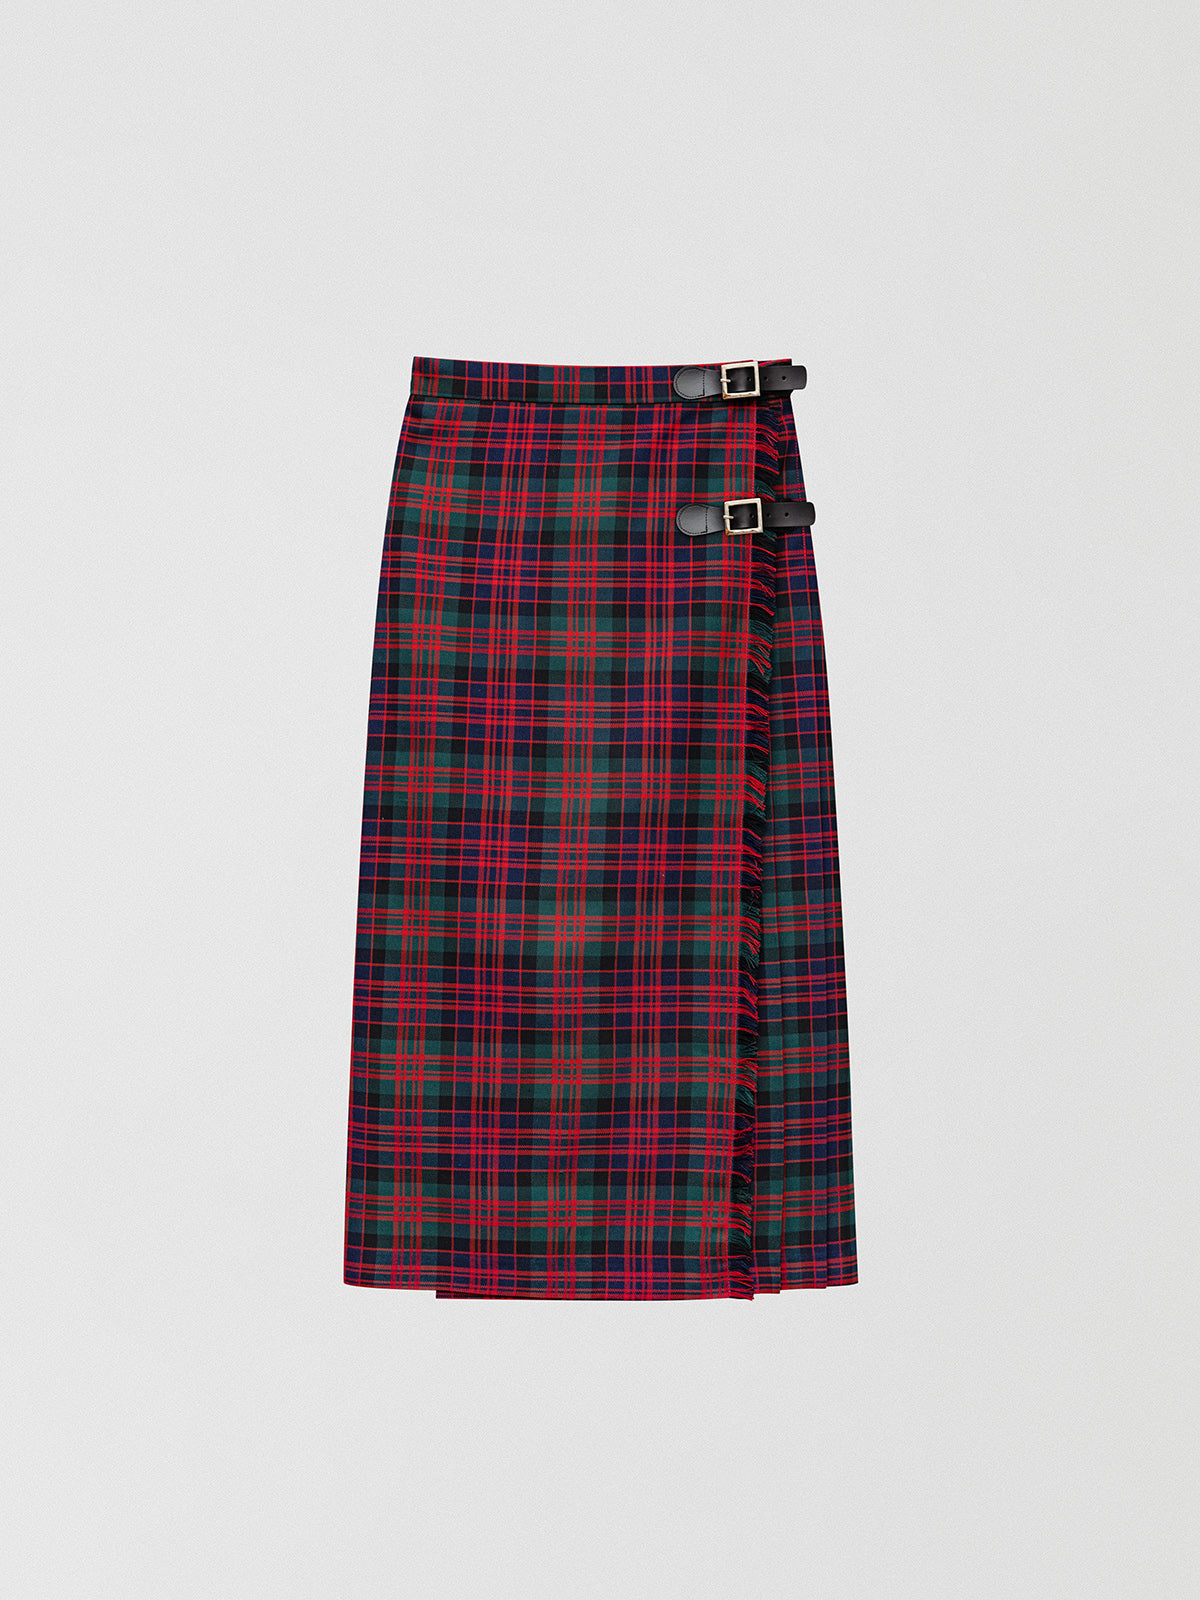 Checked Scottish midi skirt in red, navy and green tones. 